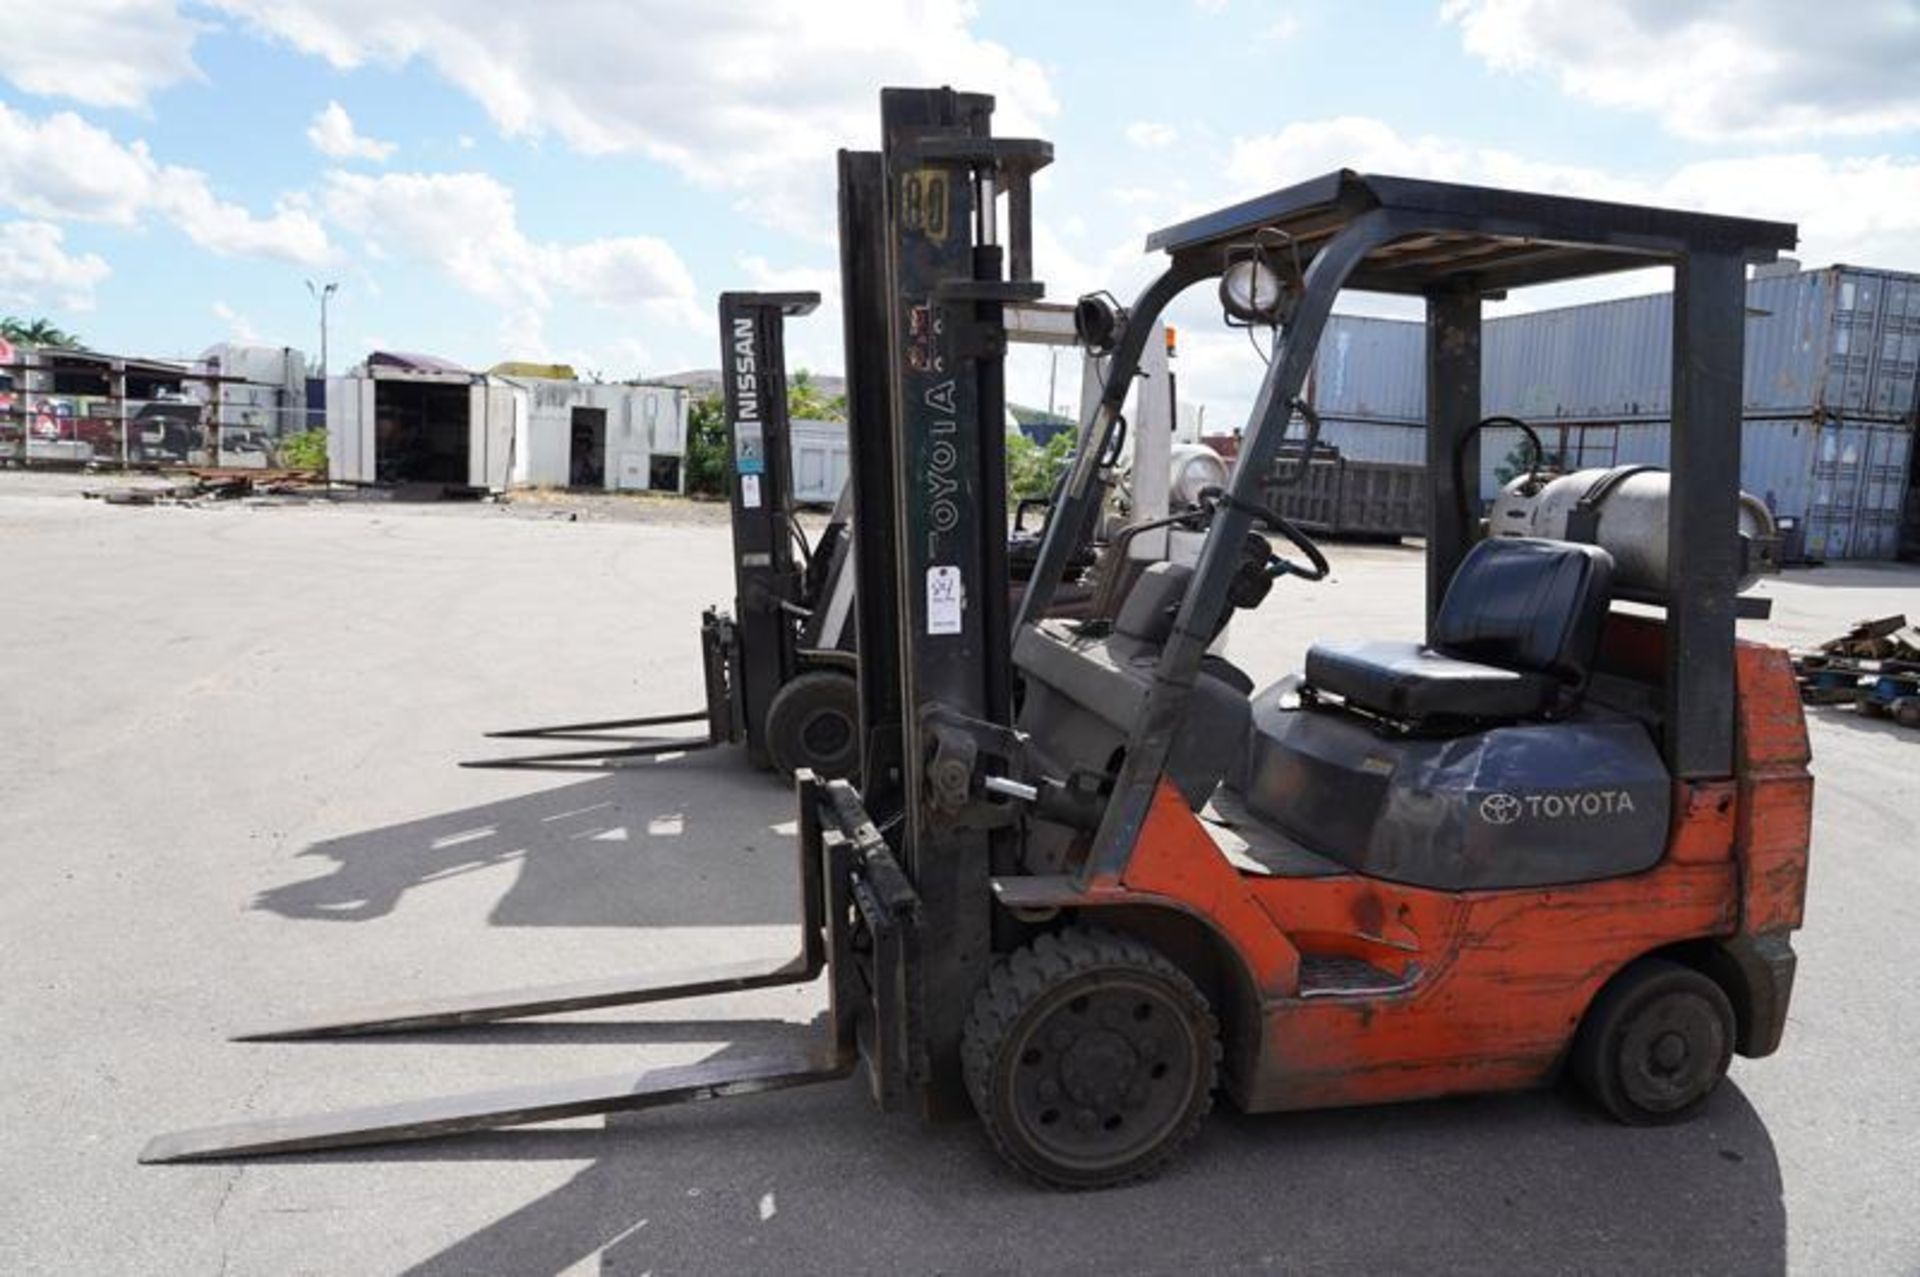 Toyota Mdl: 7FGCU25 5,000 Lbs. Propane Forklift, 5,000 Lbs Lift Capacity, Load Center 24'', Lift Spe